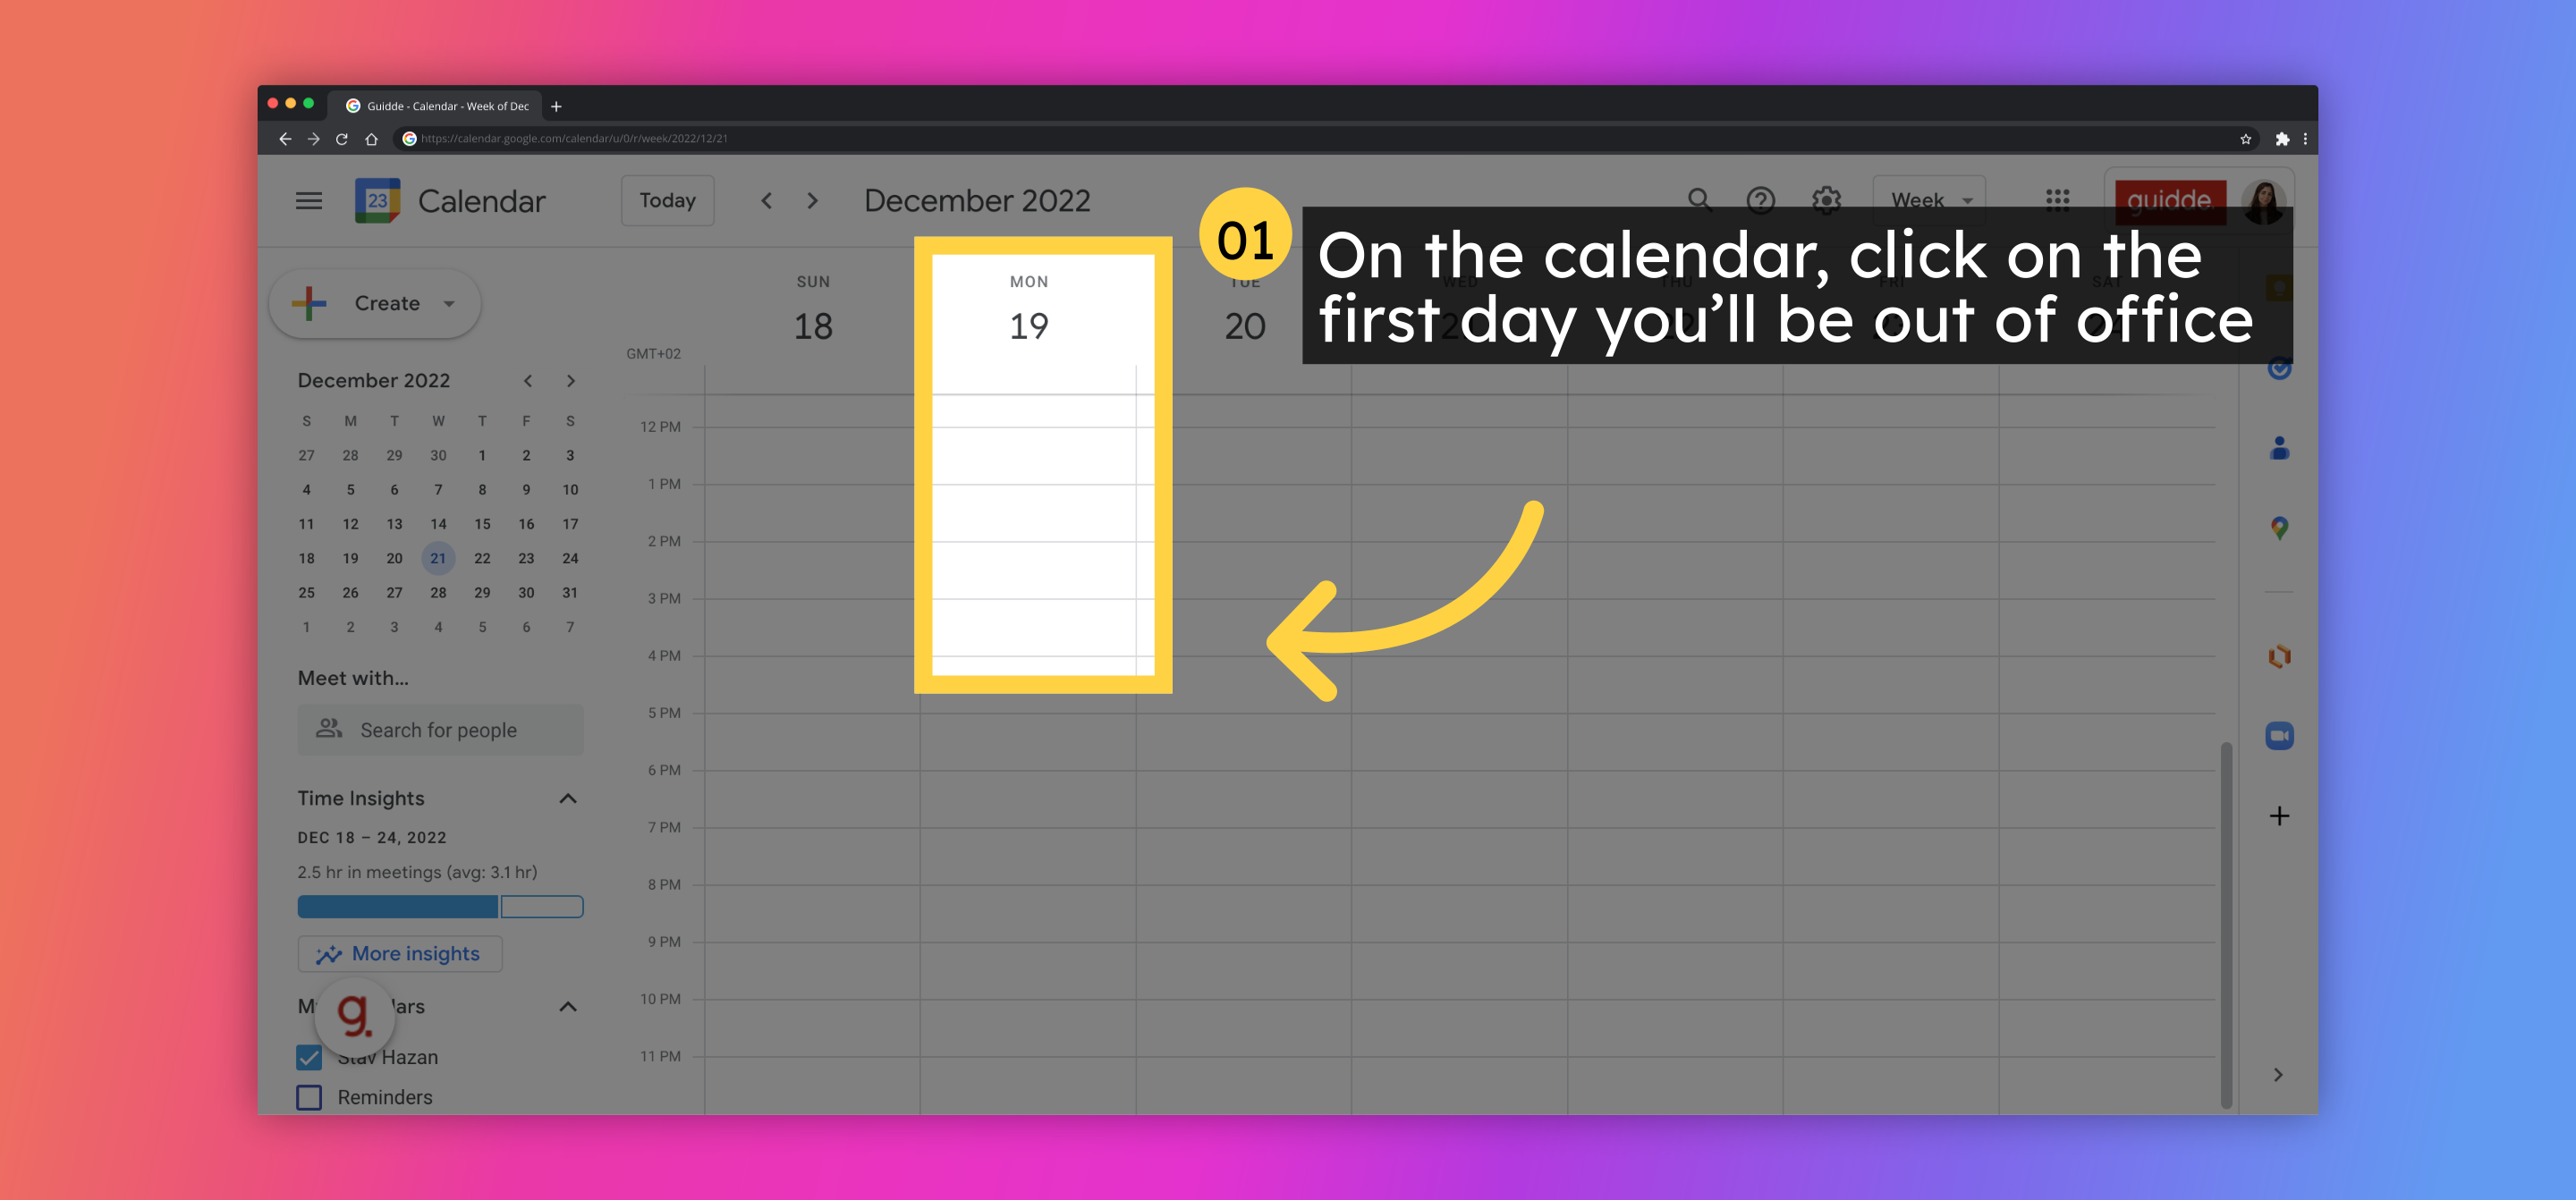 On the calendar, click on the first day you’ll be out of office